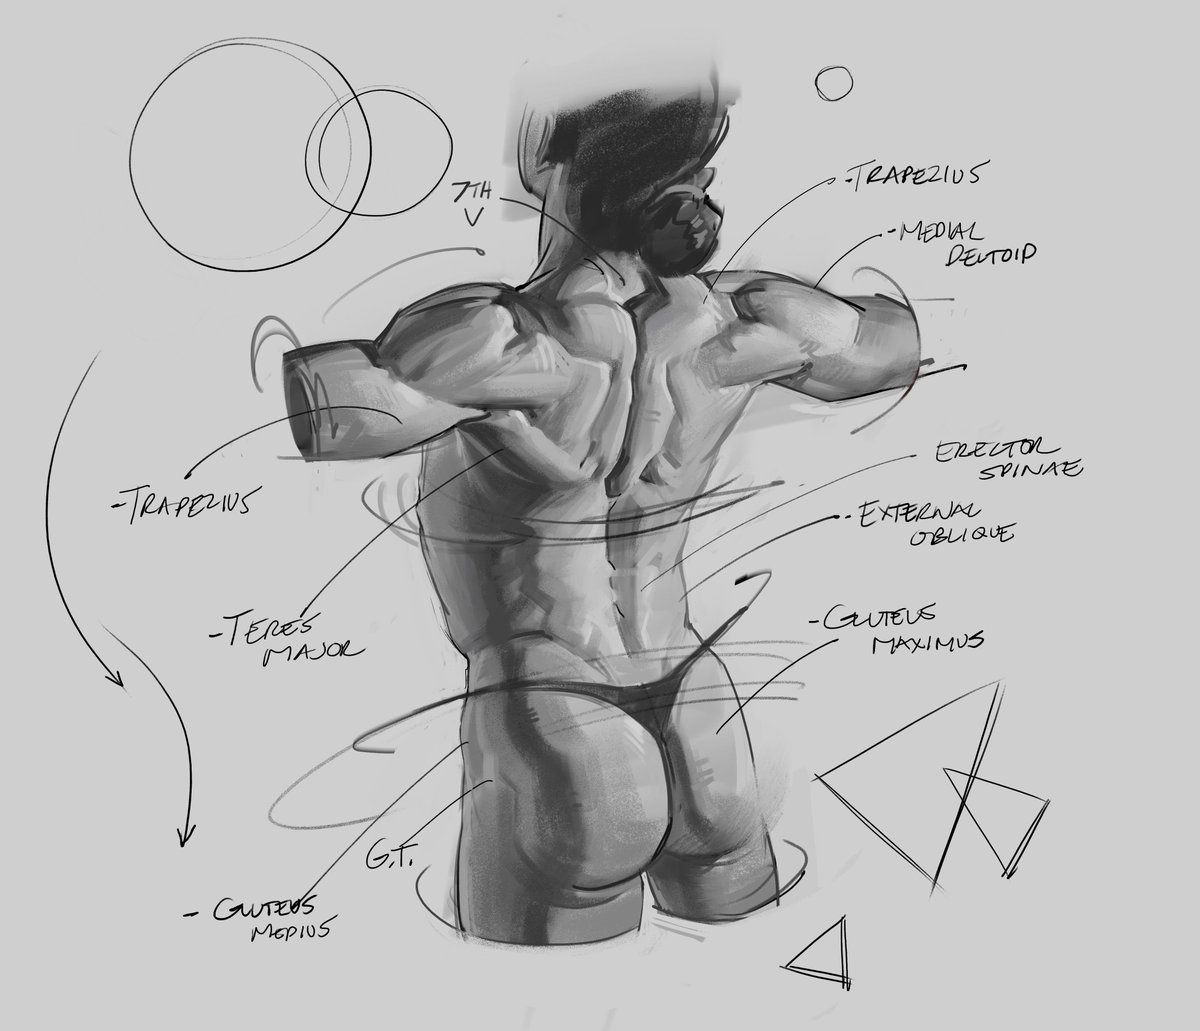 Morning sketch and study of the back muscles! #maletorso #back #muscles #humananatomy #anatomy #drawing #sketches #doodles #art #rendering #shading #teresmajor #glutes #obliques #deltoids #figuredrawing